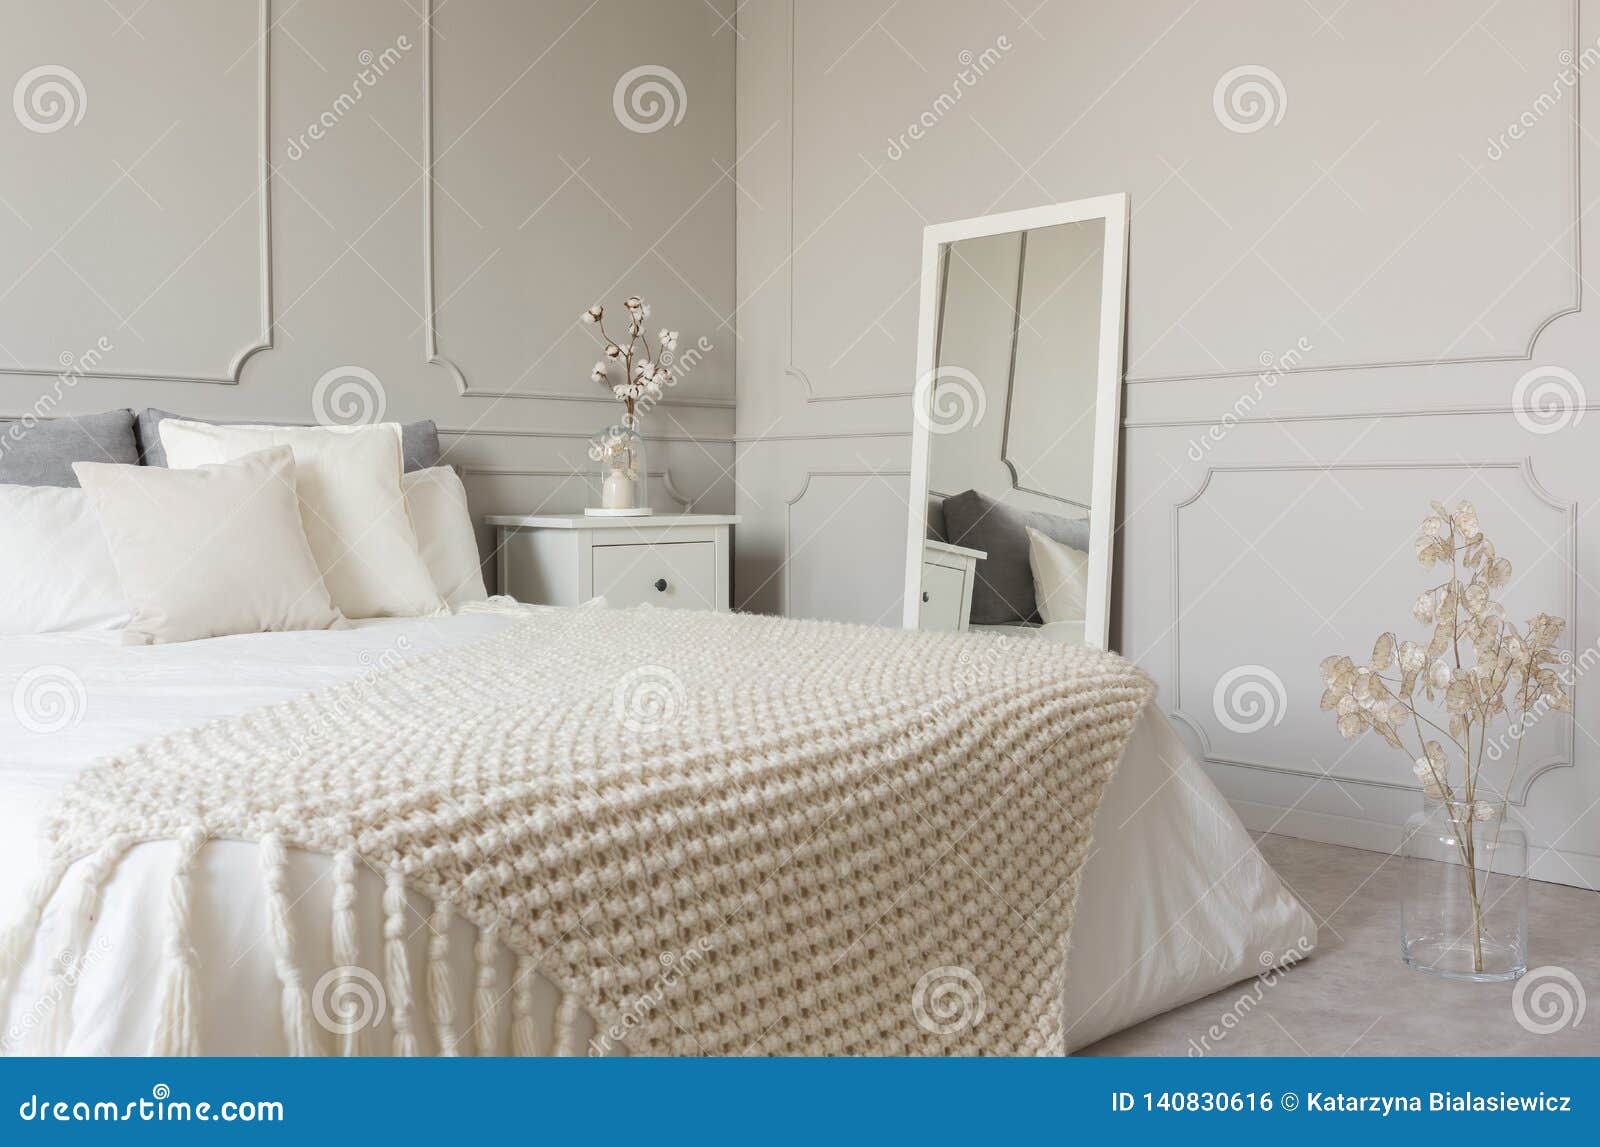 Beige Woolen Blanket On White Bedding Of King Size Bed In Fashionable Bedroom Interior With Grey Wall Stock Photo Image Of Real Bedroom 140830616